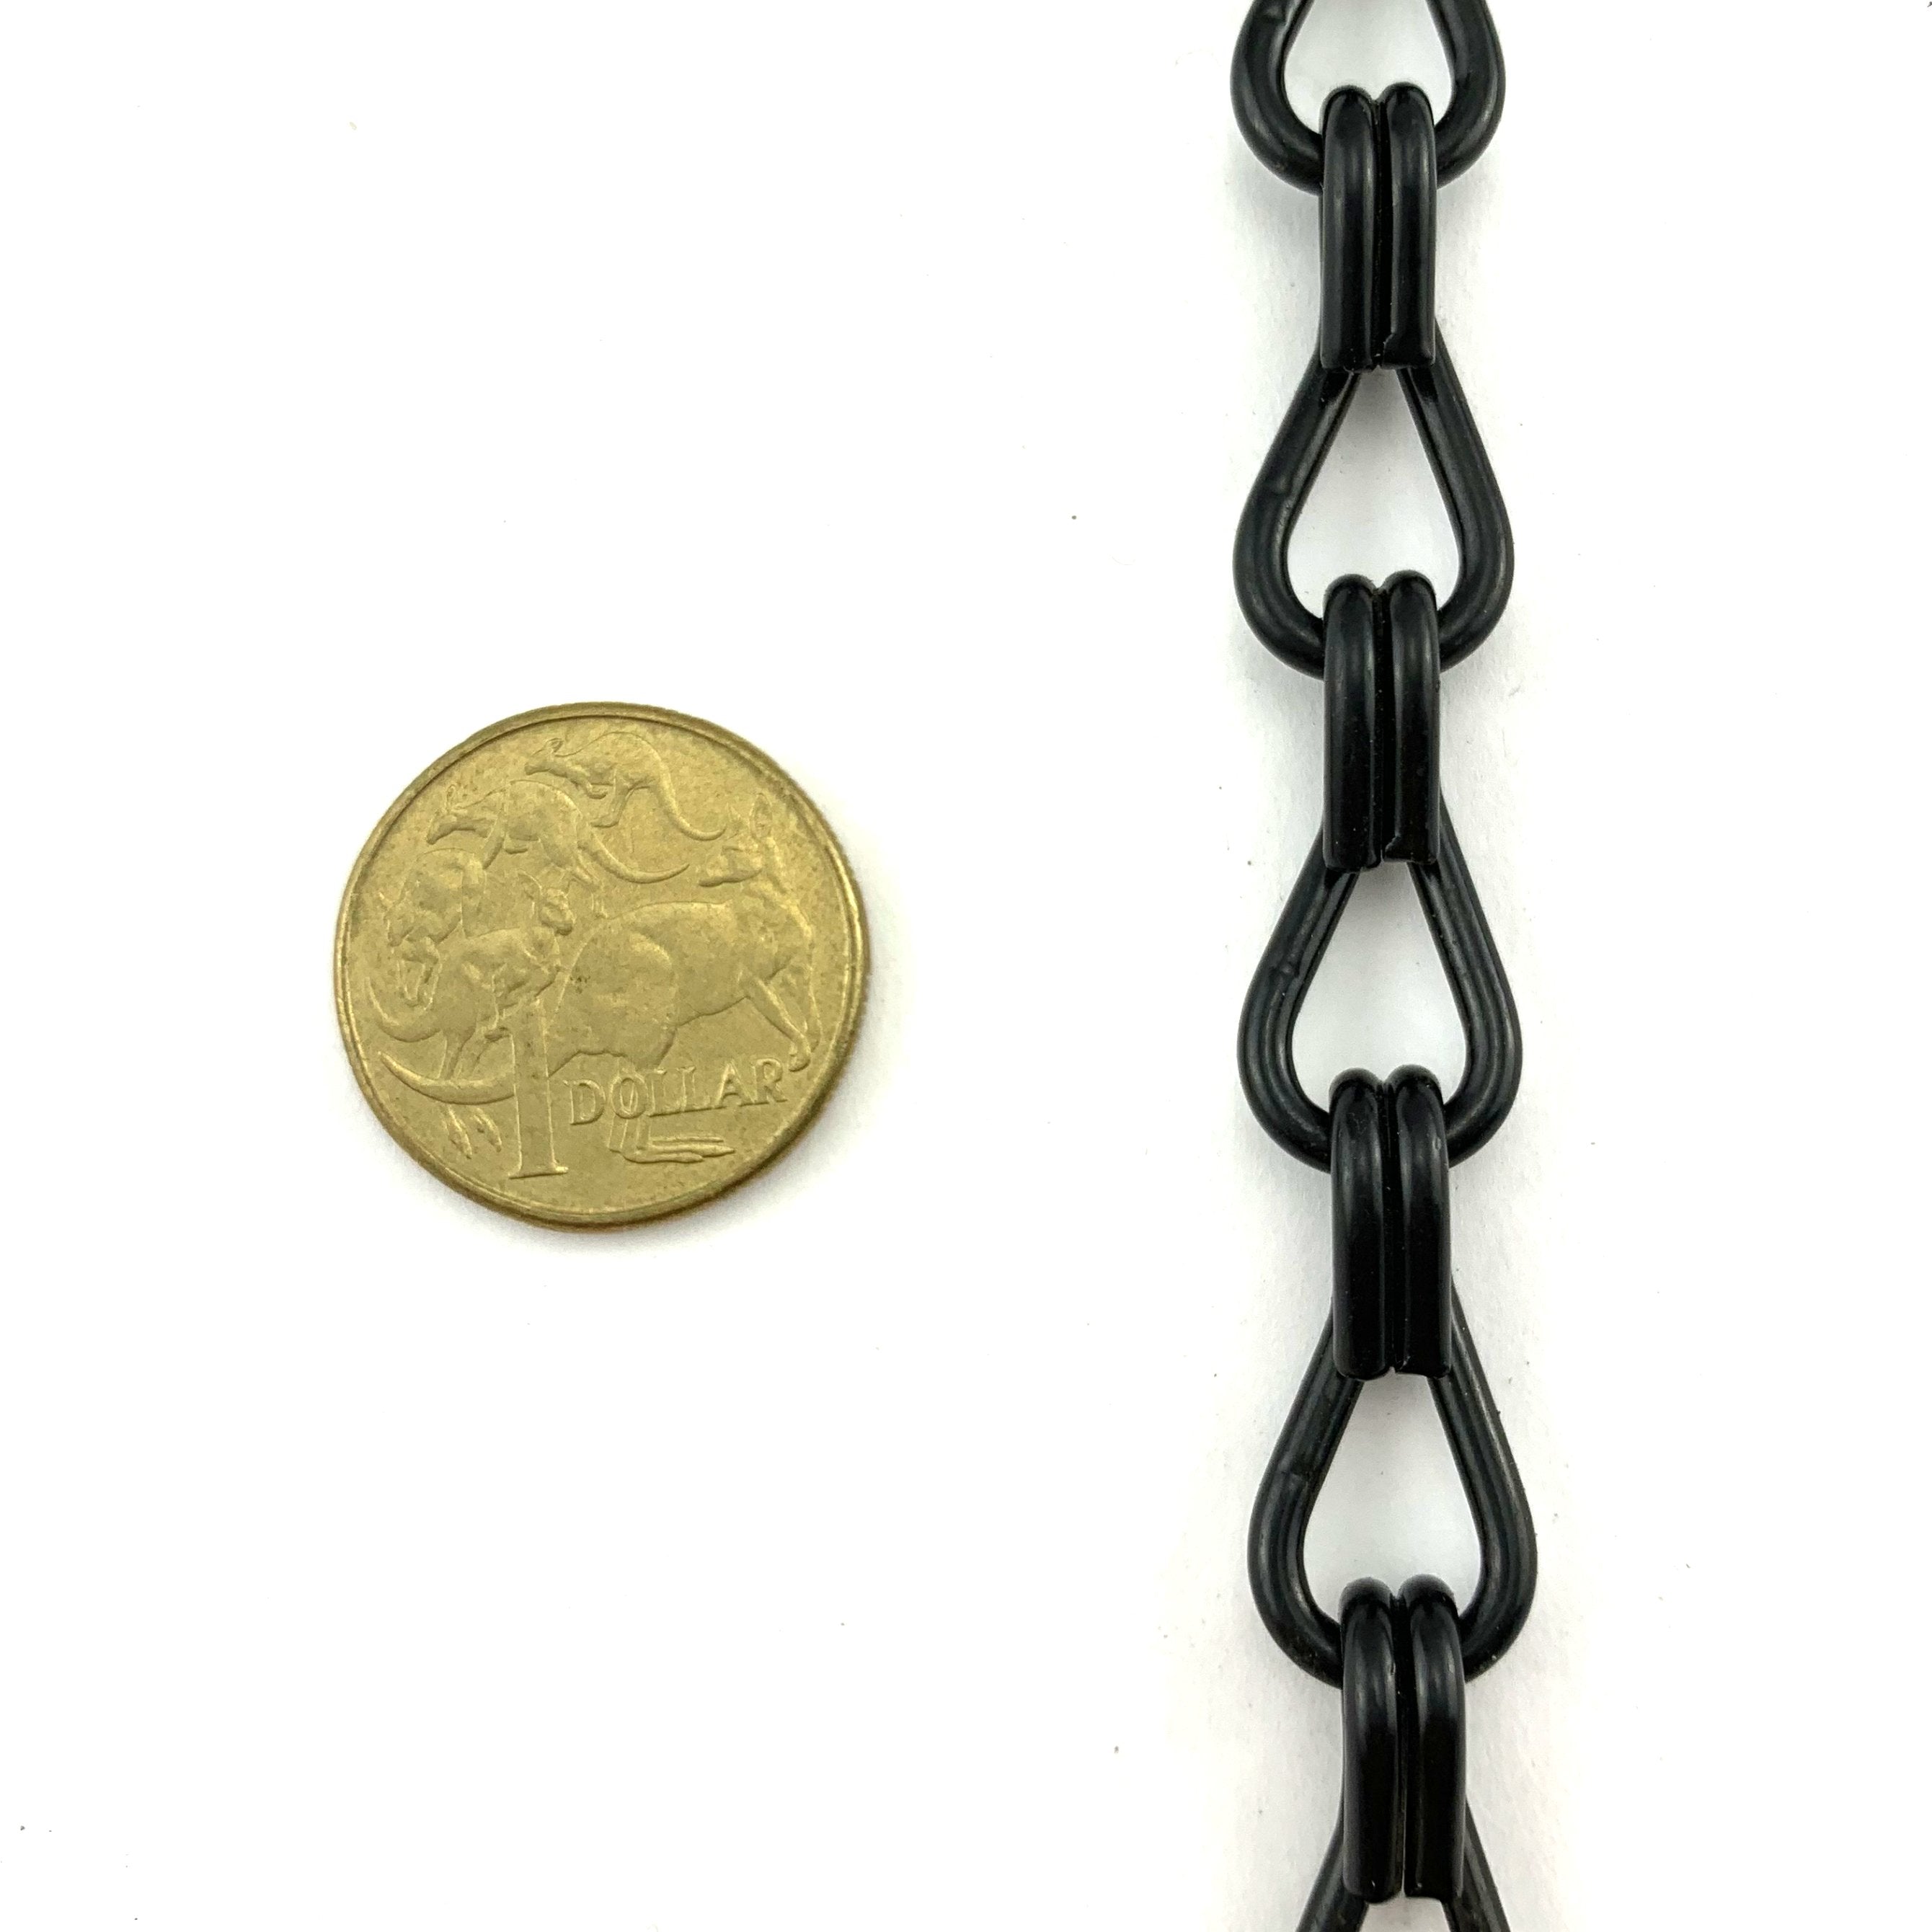 Commercial grade double jack chain in black powder coated finish, size: 2.5mm. Melbourne, Australia.